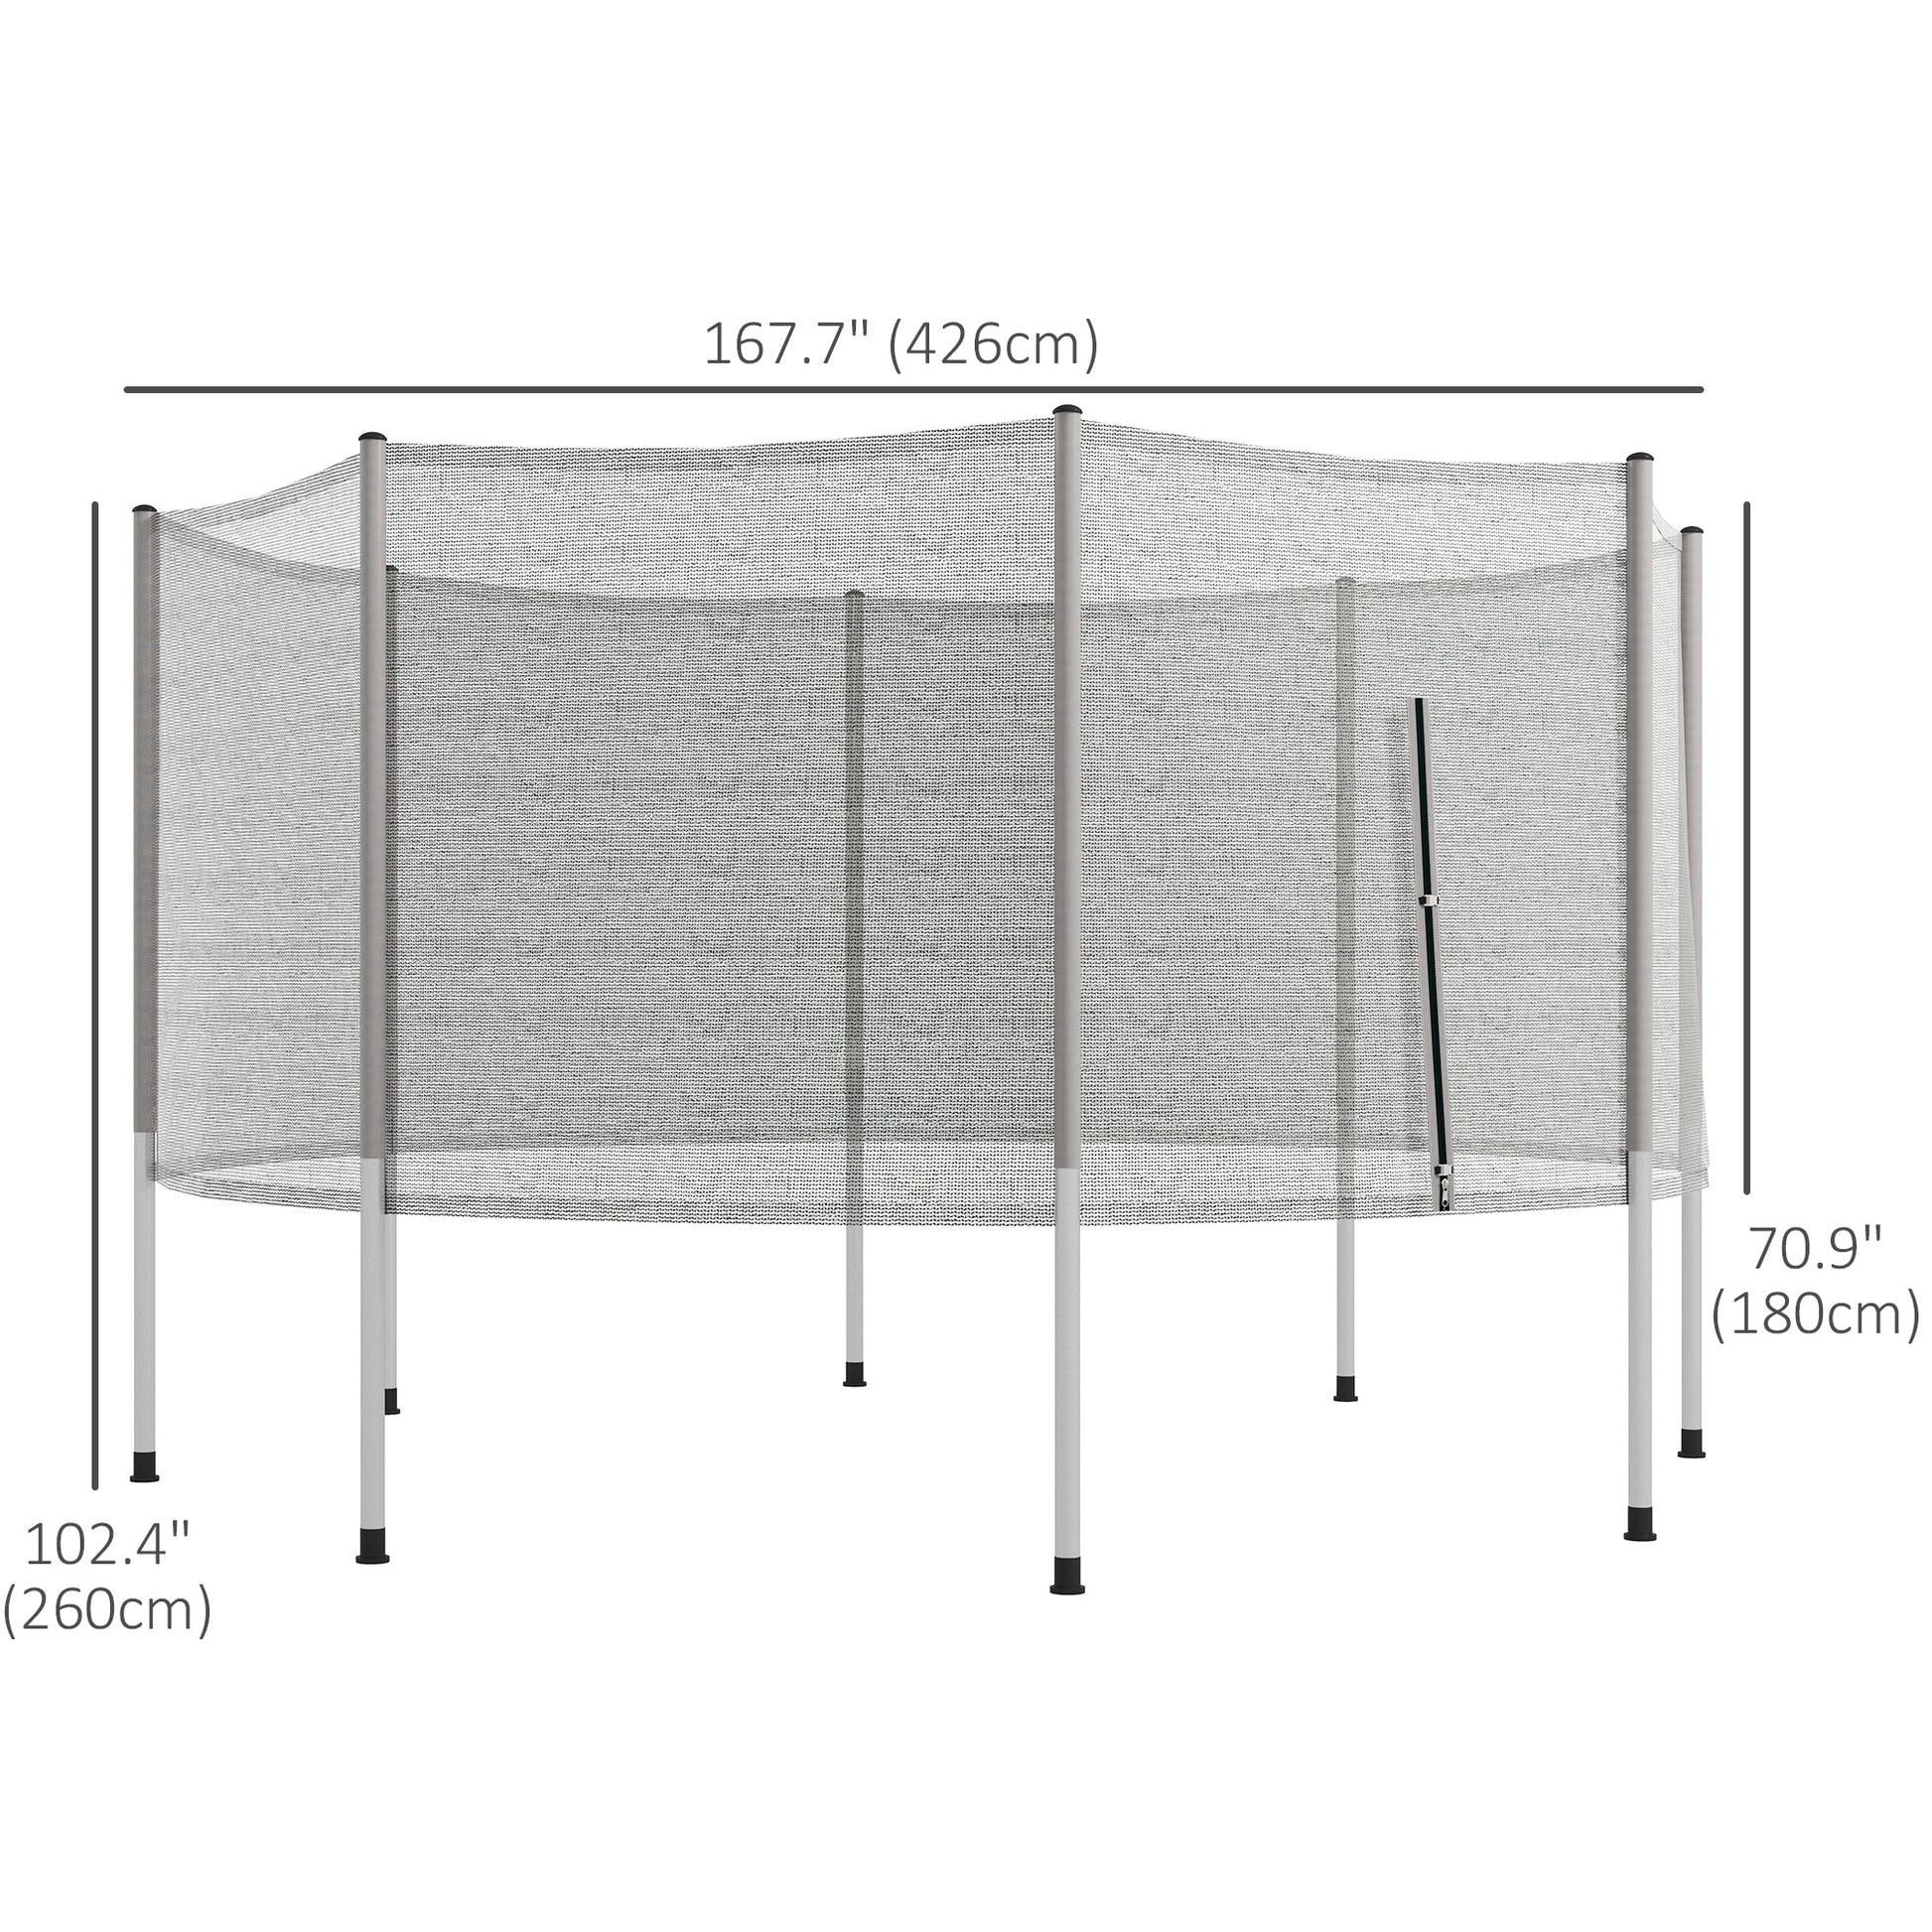 14FT Enclosure Trampolining Bounce Safety Accessories Trampoline Net with 8 Poles, Grey at Gallery Canada